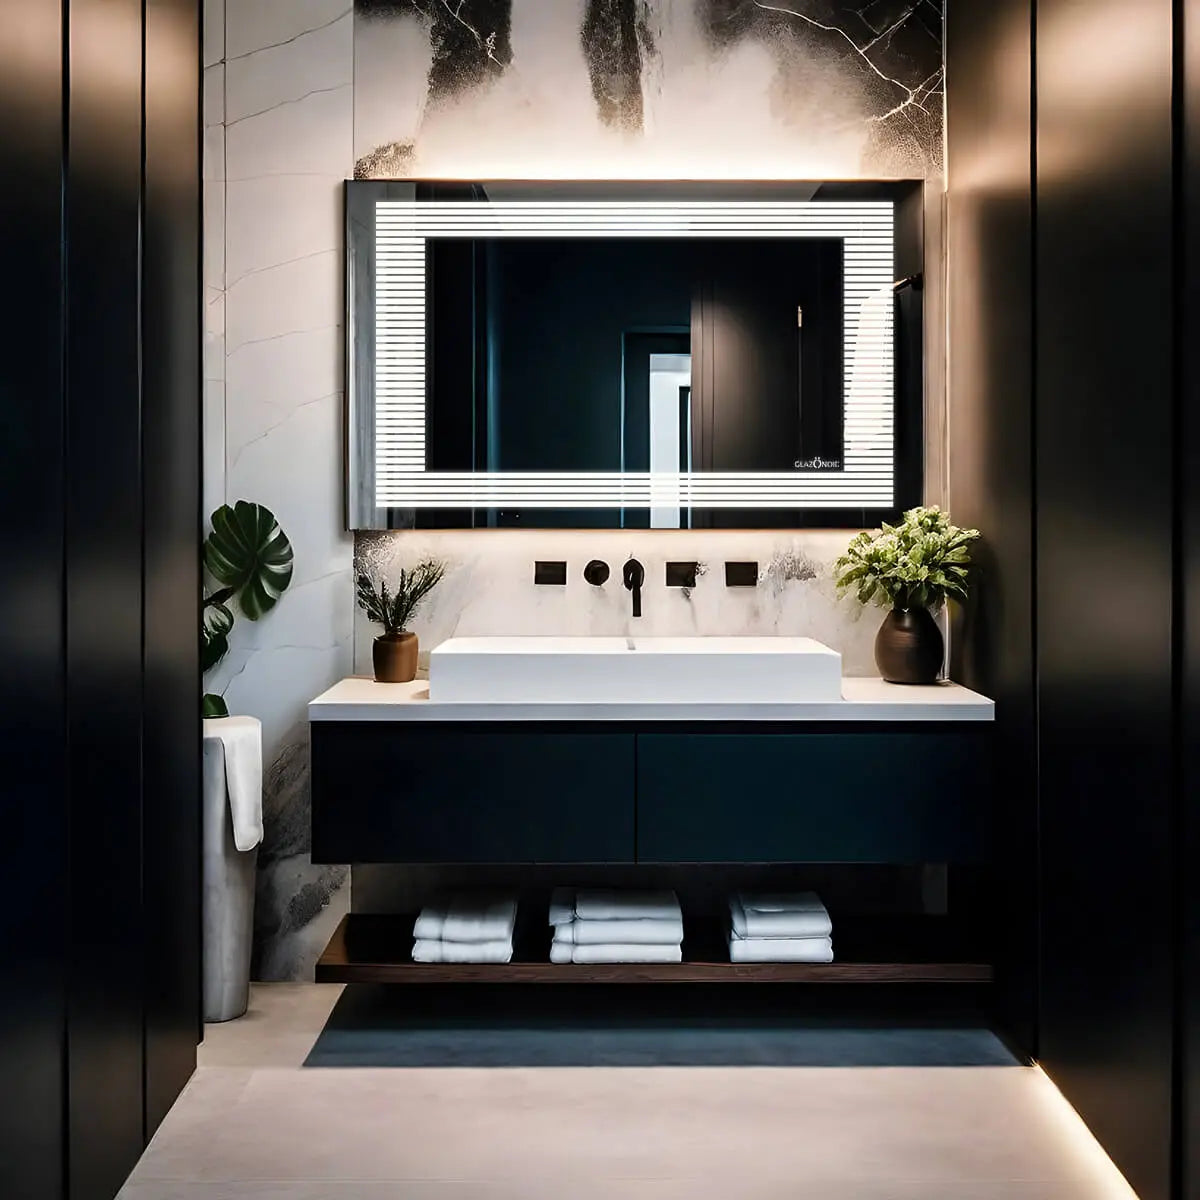 A rectangular bathroom mirror with built-in horizontal LED lights along the sides. The mirror is framed and mounted on a bathroom wall with a faucet and sink below. Text overlaid on the image reads ‘Glazonoid’